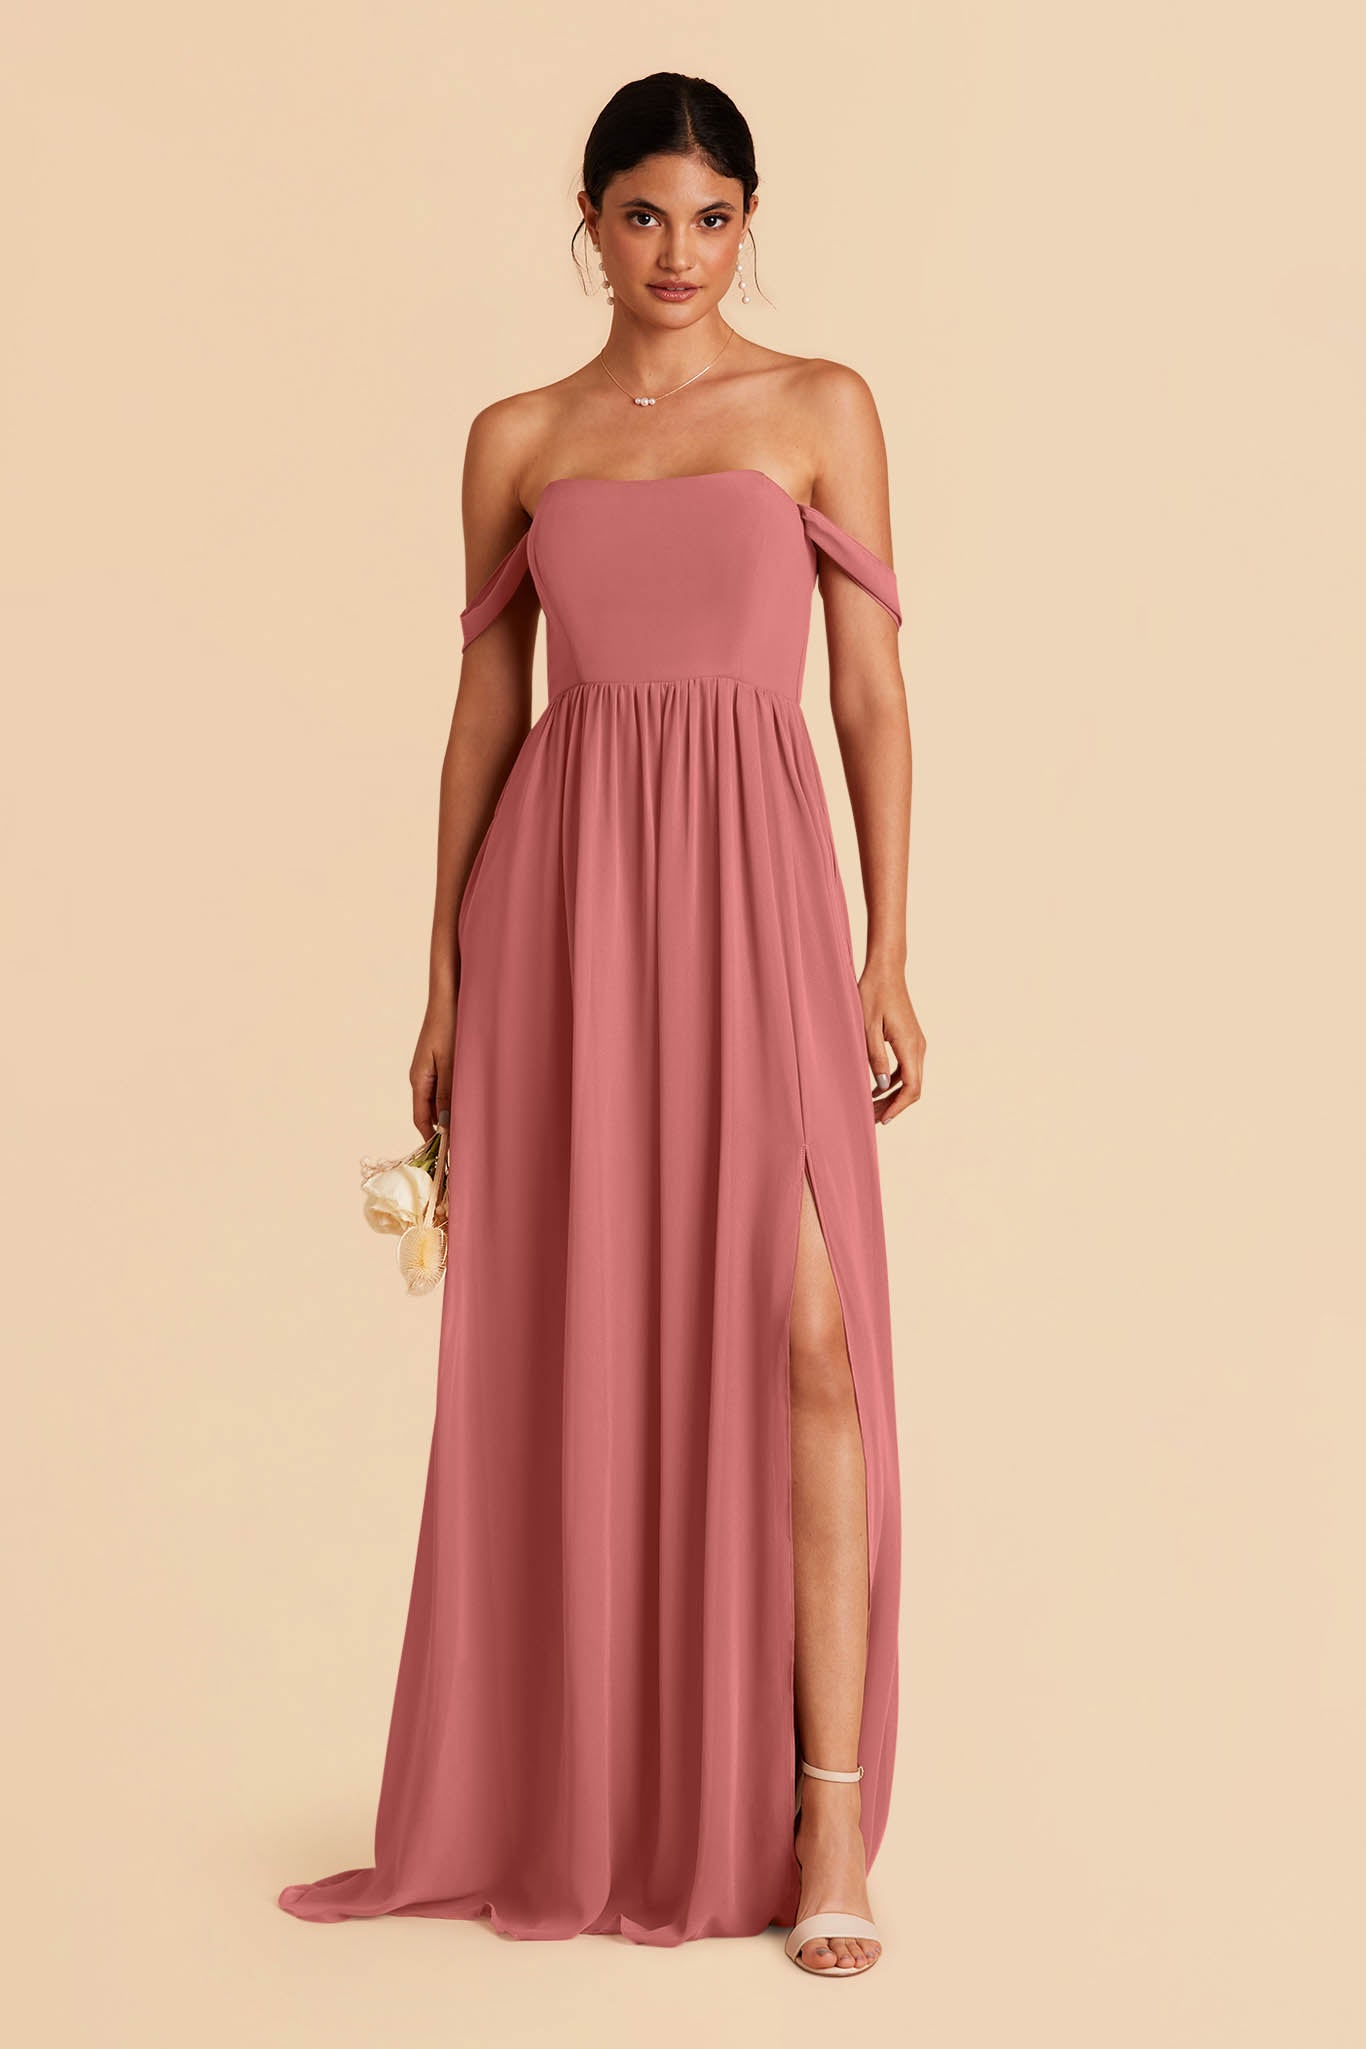 Mulberry August Convertible Dress by Birdy Grey